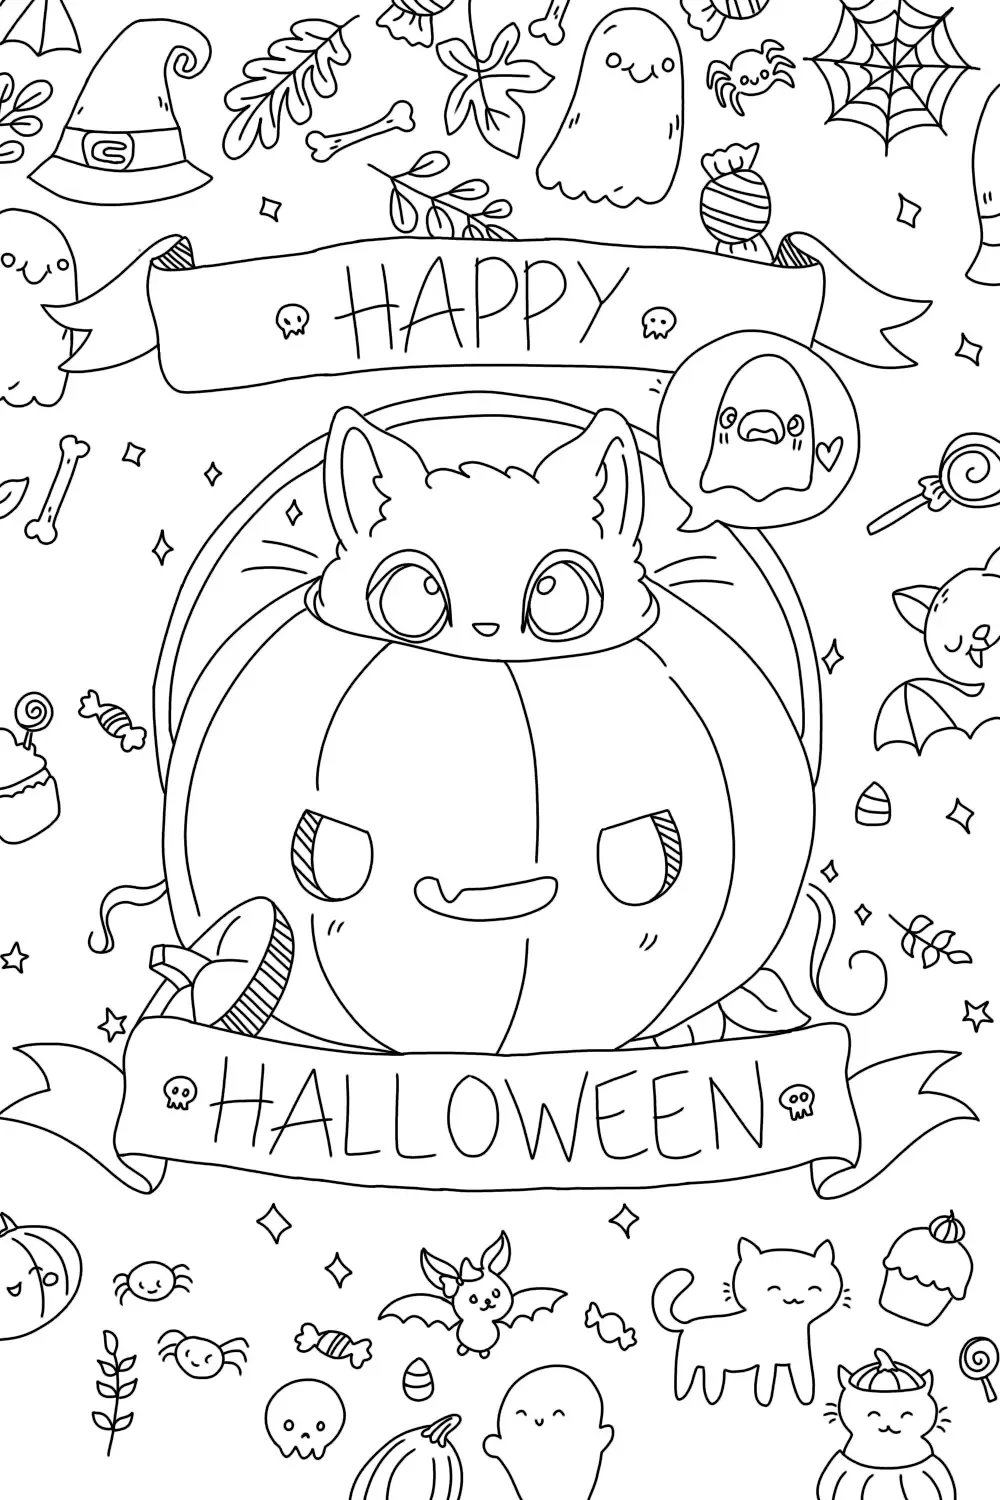 Happy halloween coloring pages for kids